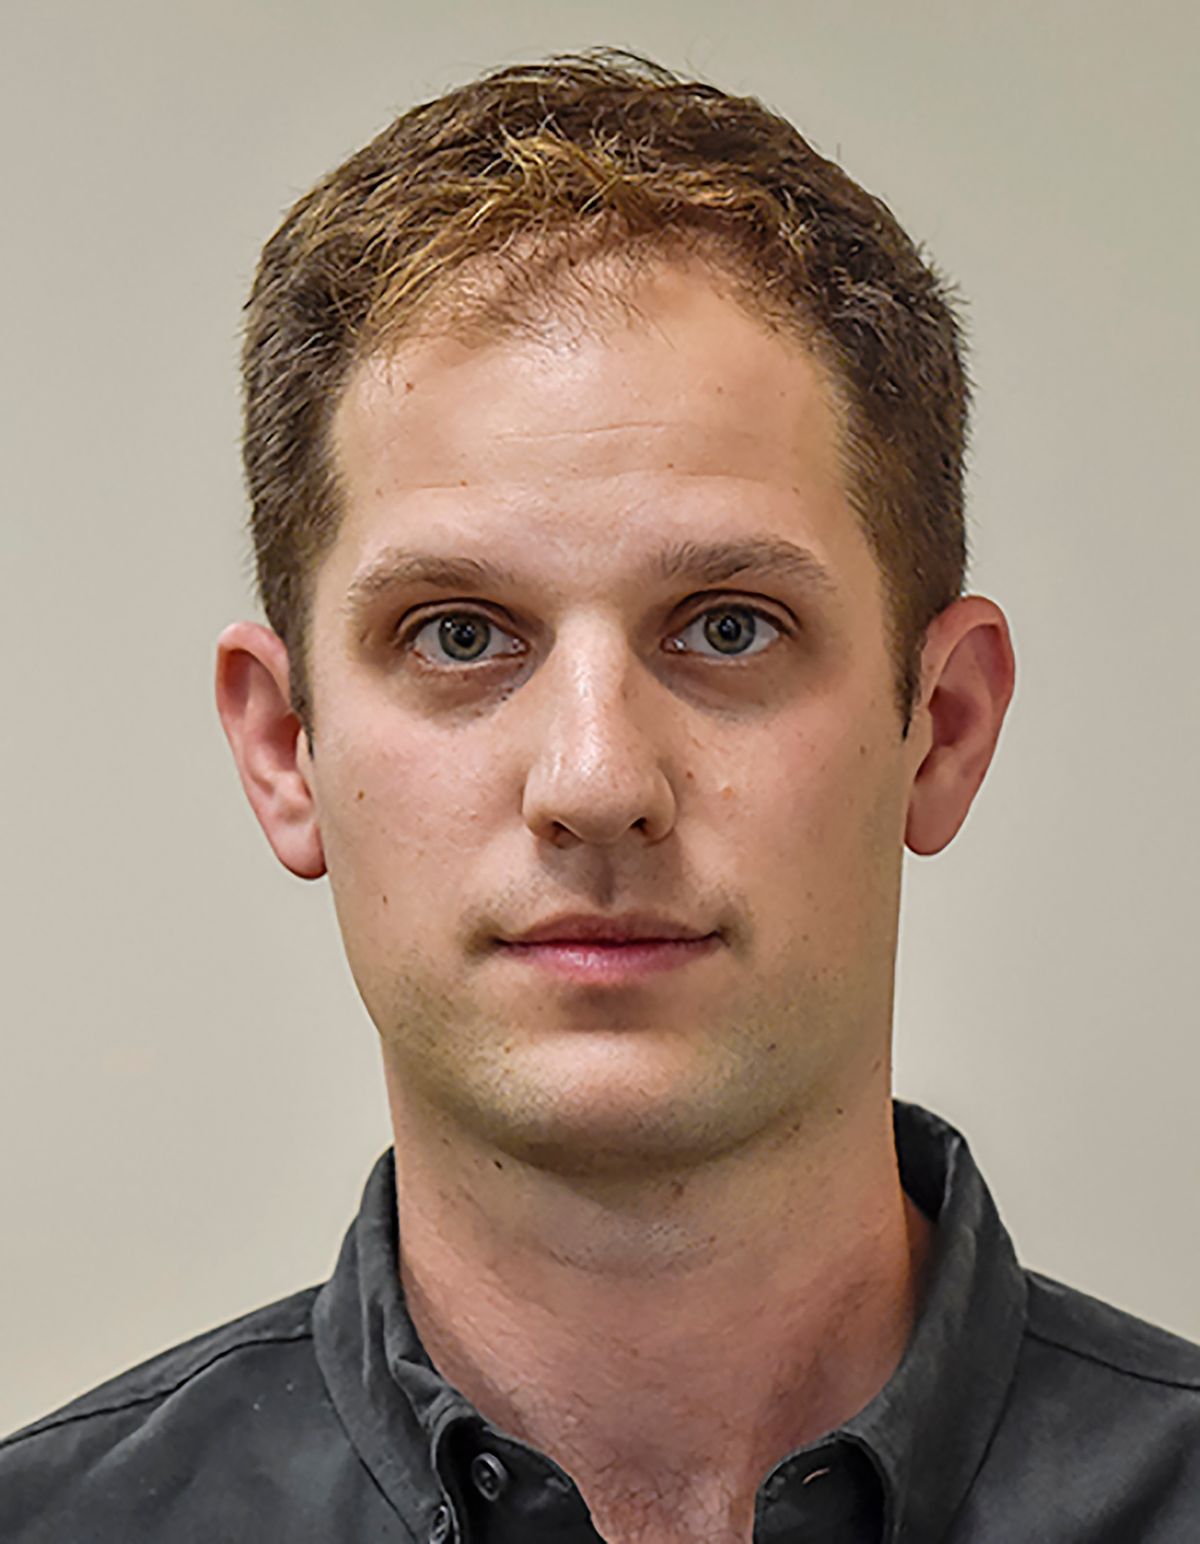 An undated ID photo of journalist Evan Gershkovich. - A US reporter for The Wall Street Journal newspaper has been detained in Russia for espionage, Russian news agencies reported Thursday, citing the FSB security services. "The FSB halted the illegal activities of US citizen Evan Gershkovich... a correspondent of the Moscow bureau of the American newspaper The Wall Street Journal, accredited with the Russian foreign ministry," the FSB was quoted as saying. He is "suspected of spying in the interests of the American government" and of collecting information "on an enterprise of the Russian military-industrial complex," agencies reported. 